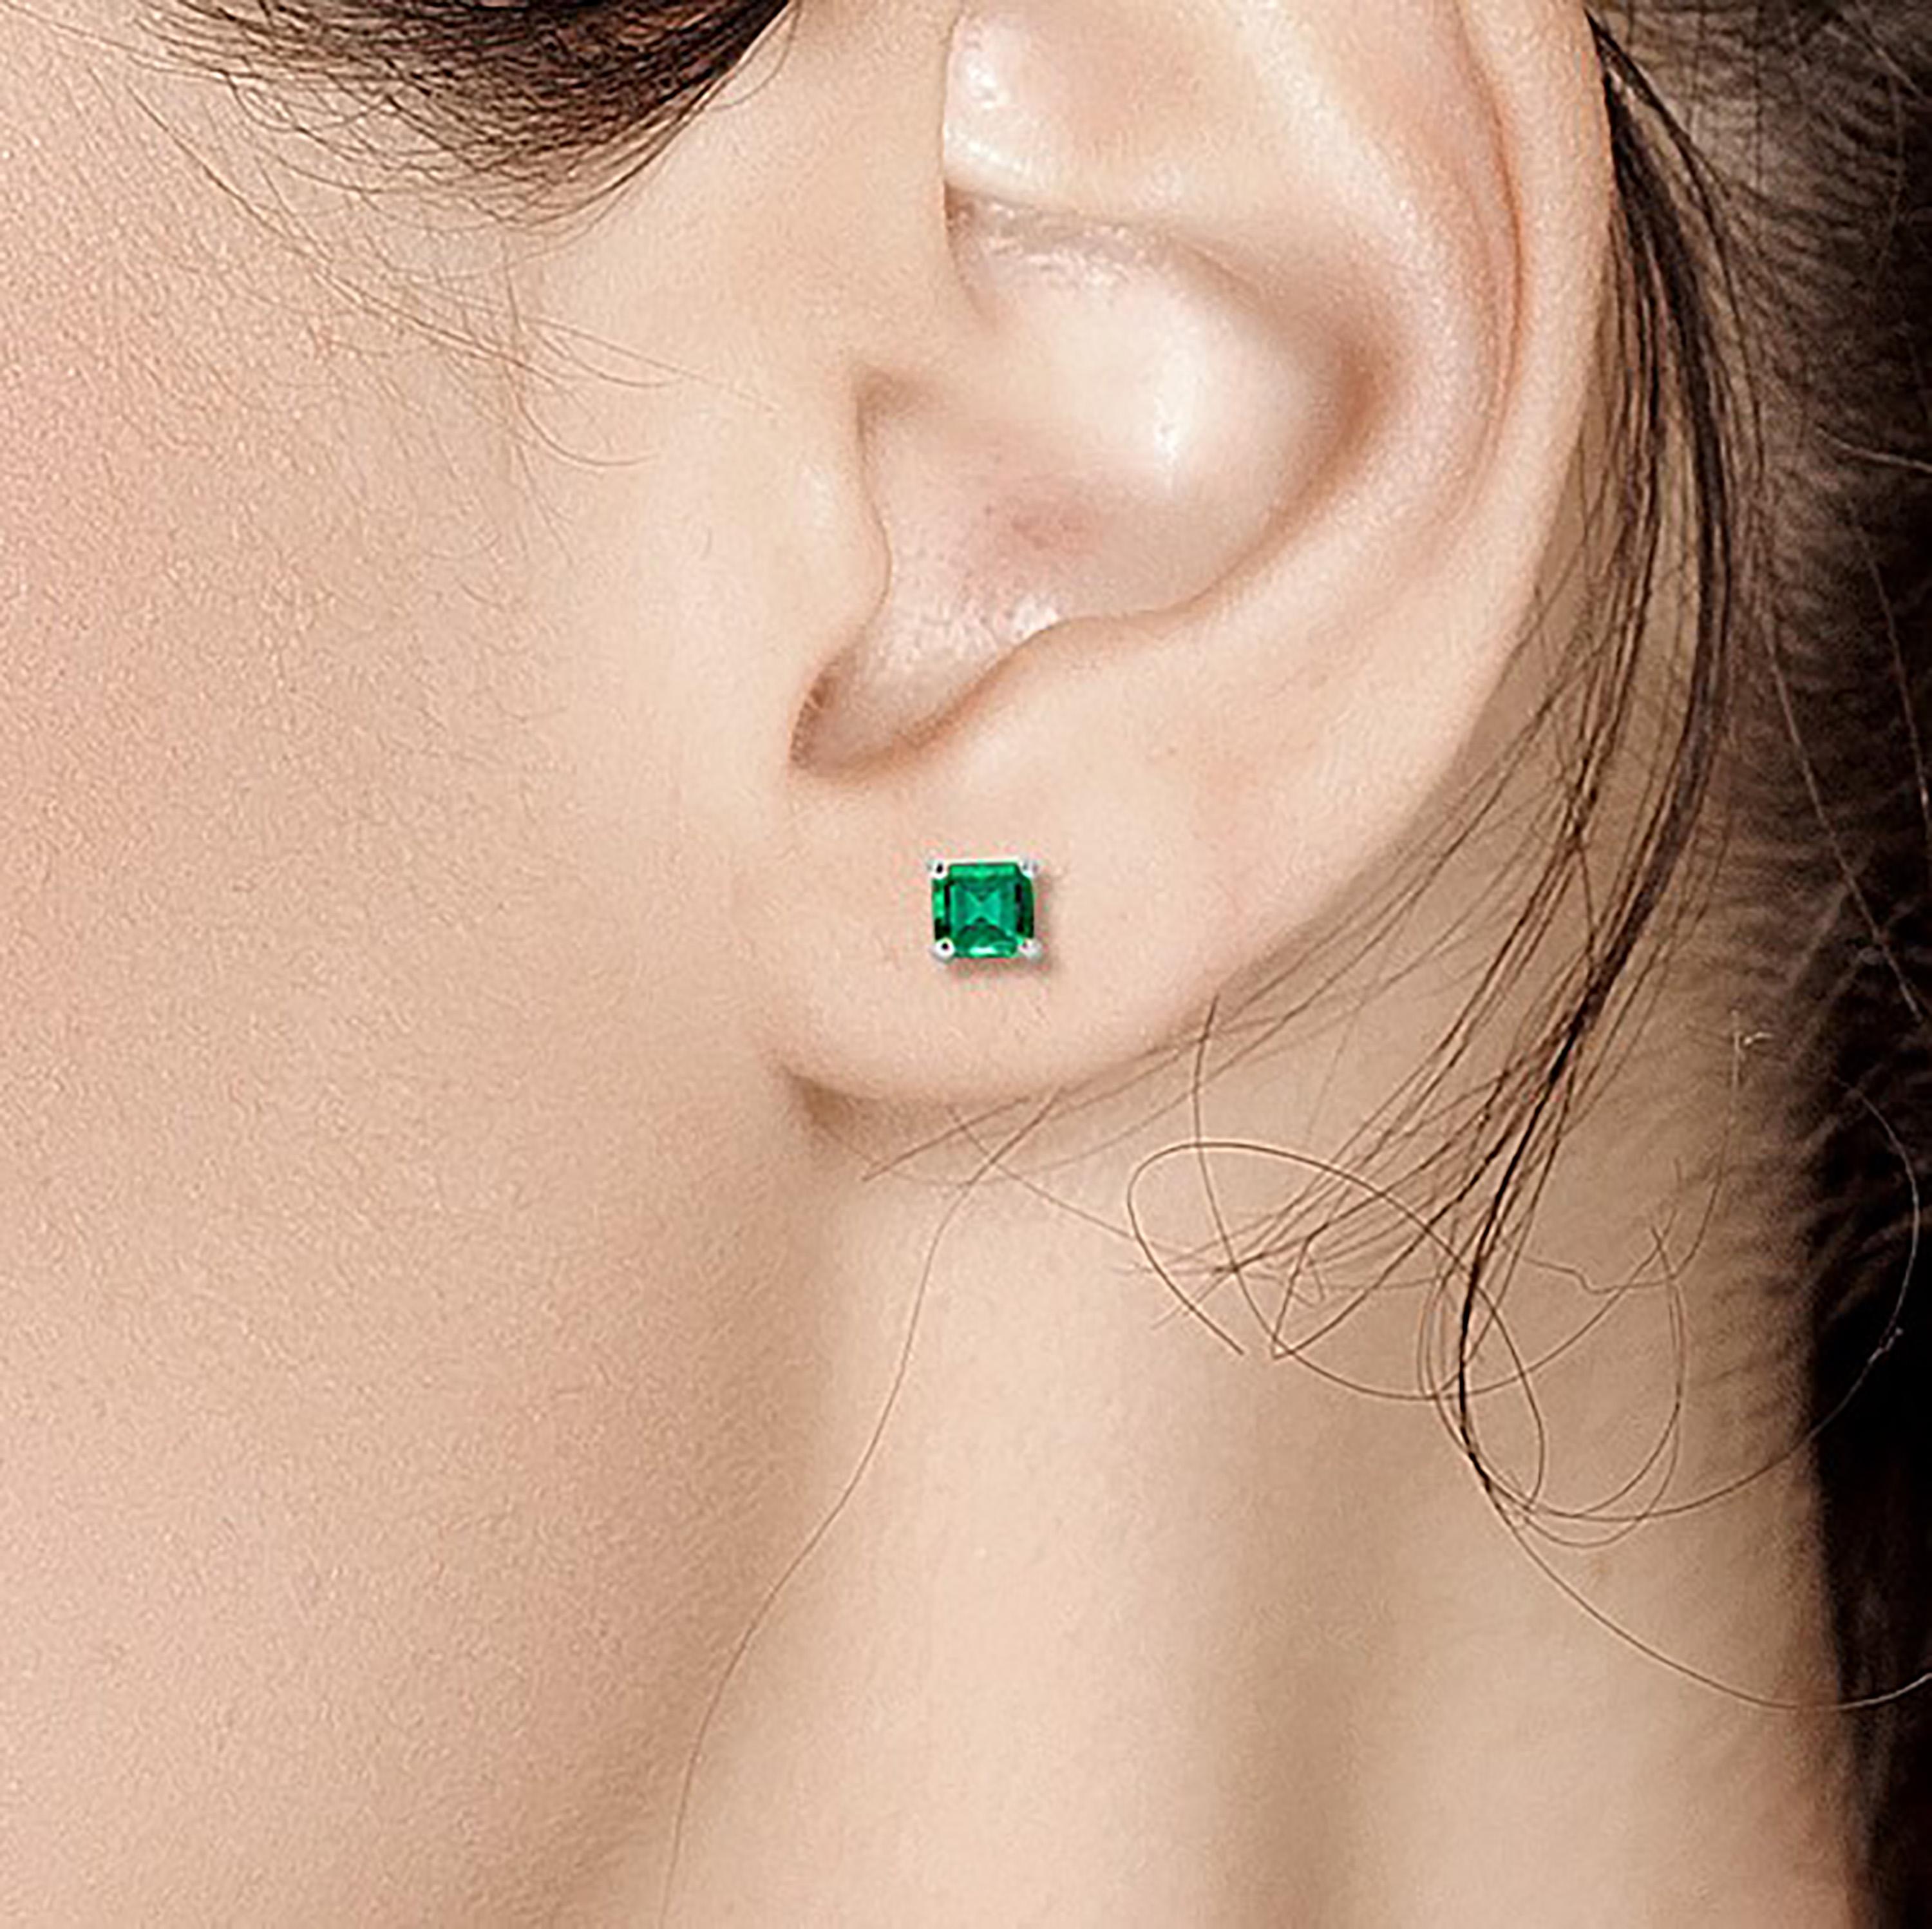 14 karats white gold 5-millimeter Colombia emerald stud earrings 
Two emerald weighings 0.80 carats
Width of the earrings 5.5 millimeter 
New Earrings
Our design team select gemstones for their quality, aesthetic beauty, and sale value of the